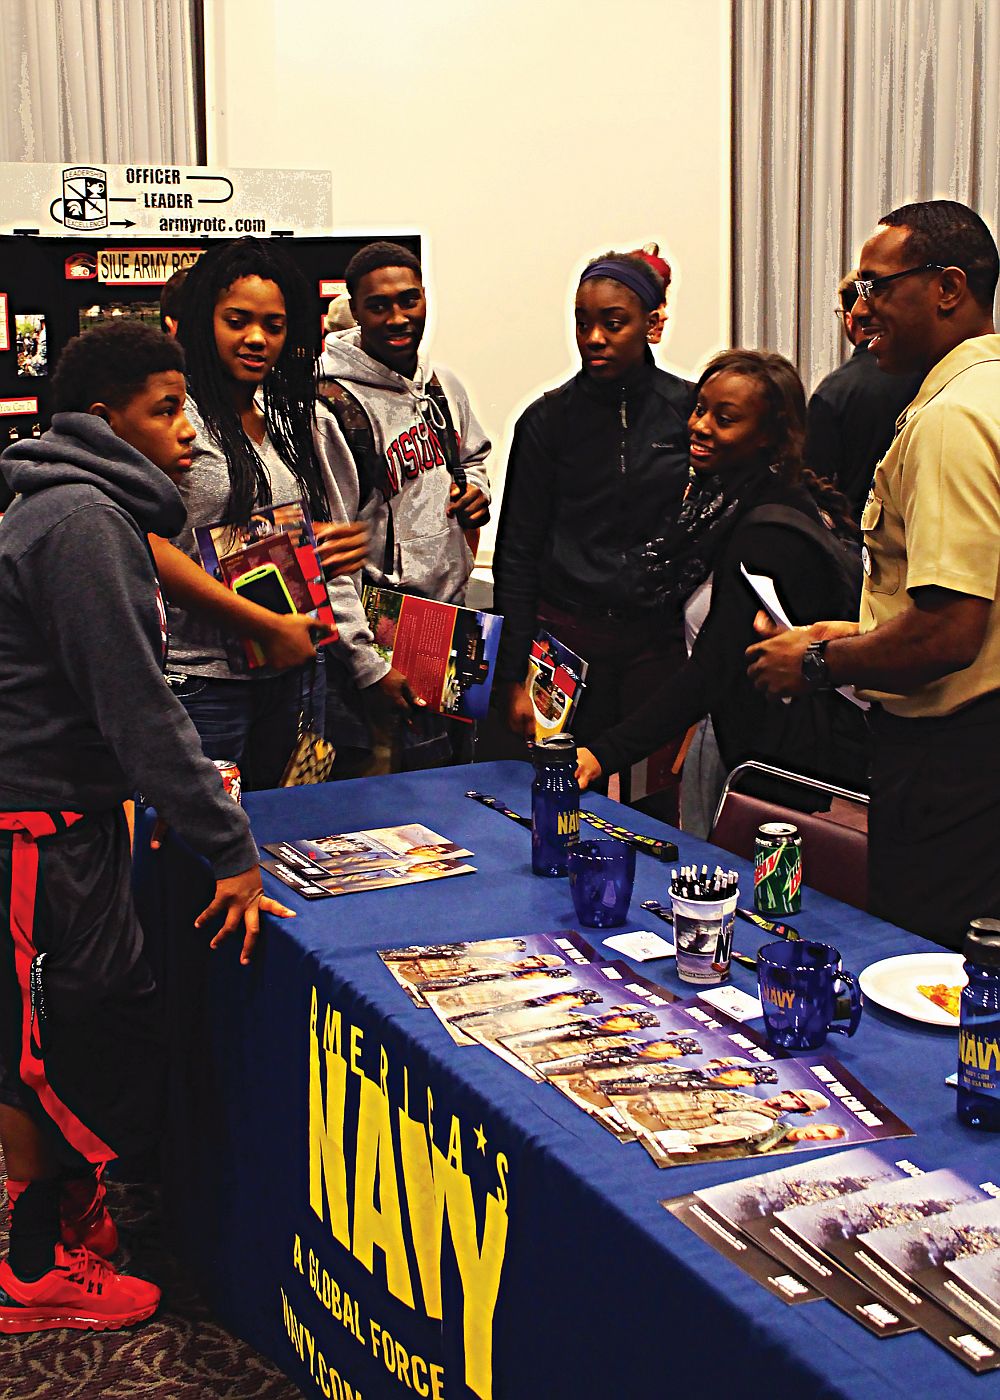 Lewis and Clark students (from left to right): Jekiyah Woods, a dentistry major from Florissant Missouri; Anita Holmes, a special education major from Alton, Illinois; Eldin Salmond, a business major from Madison, Illinois; Makayla Stokes, a psychology major, from Waterloo Iowa; and Shania Robinson also from Waterloo, IA; listening to Operations Specialist, Harvest Hines give information about joining The U.S. Navy at the 2014 Transfer Day.